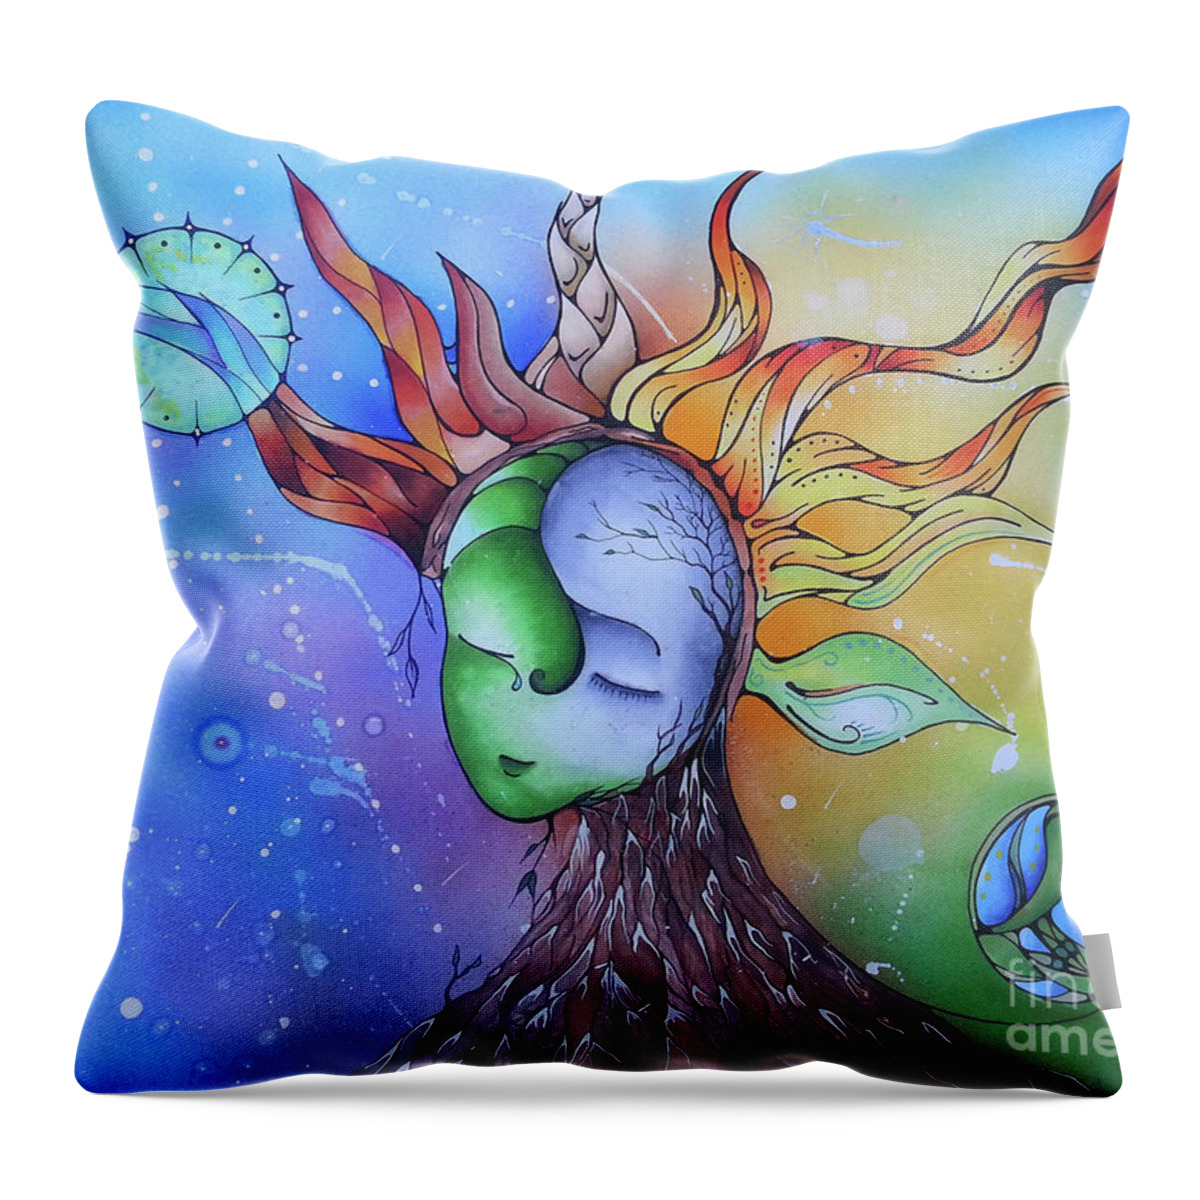 Abstract Throw Pillow featuring the drawing Fire Girl by Saffrel Kochon